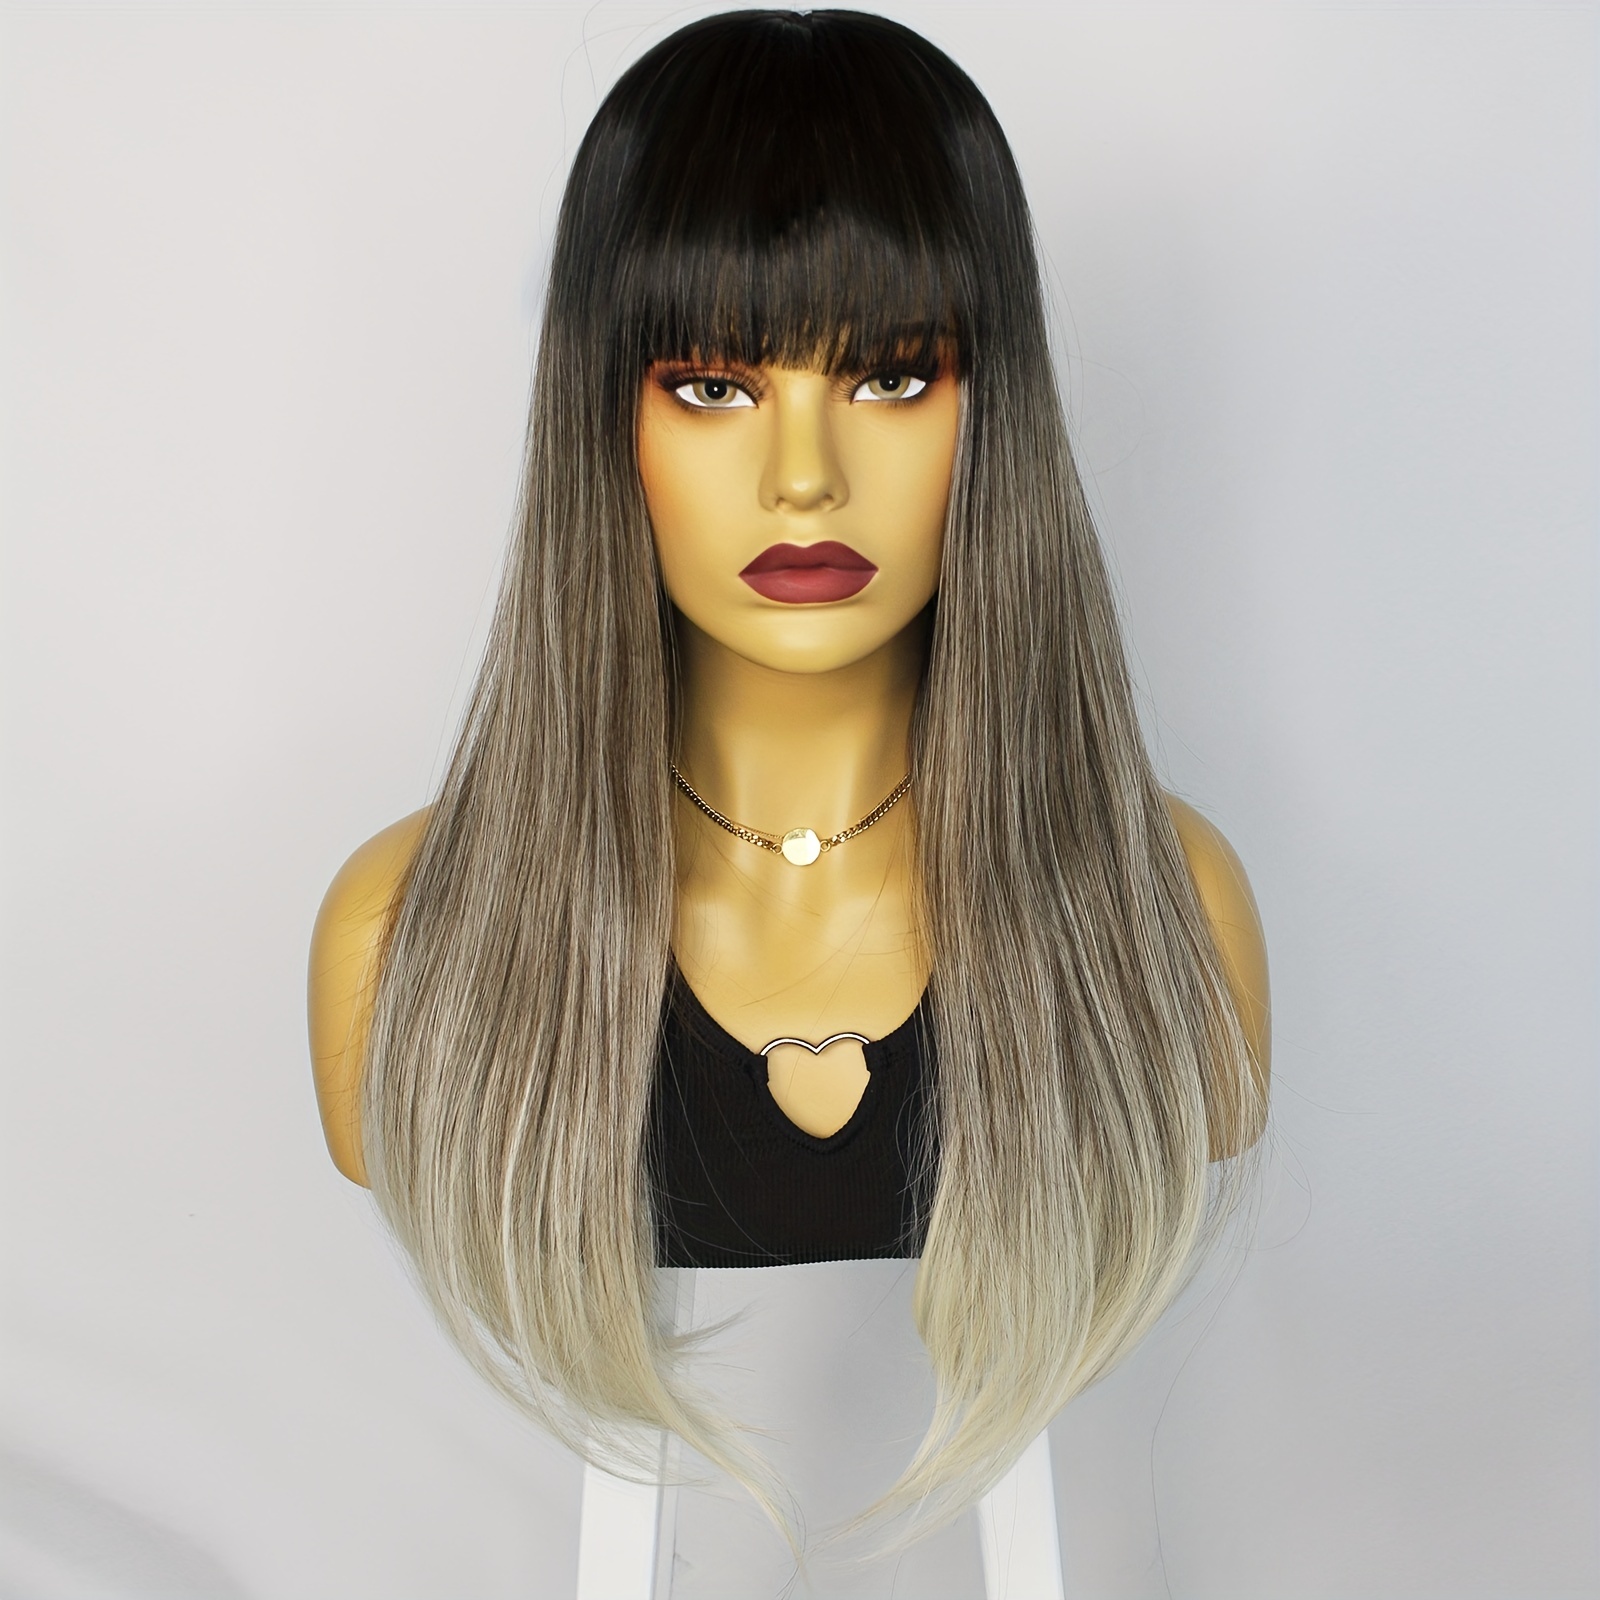 Synthetic Long Straight Black Ombre Light Blue Wig for Women High Density  Layered Hair Wigs with Bangs Halloween Costume Cosplay